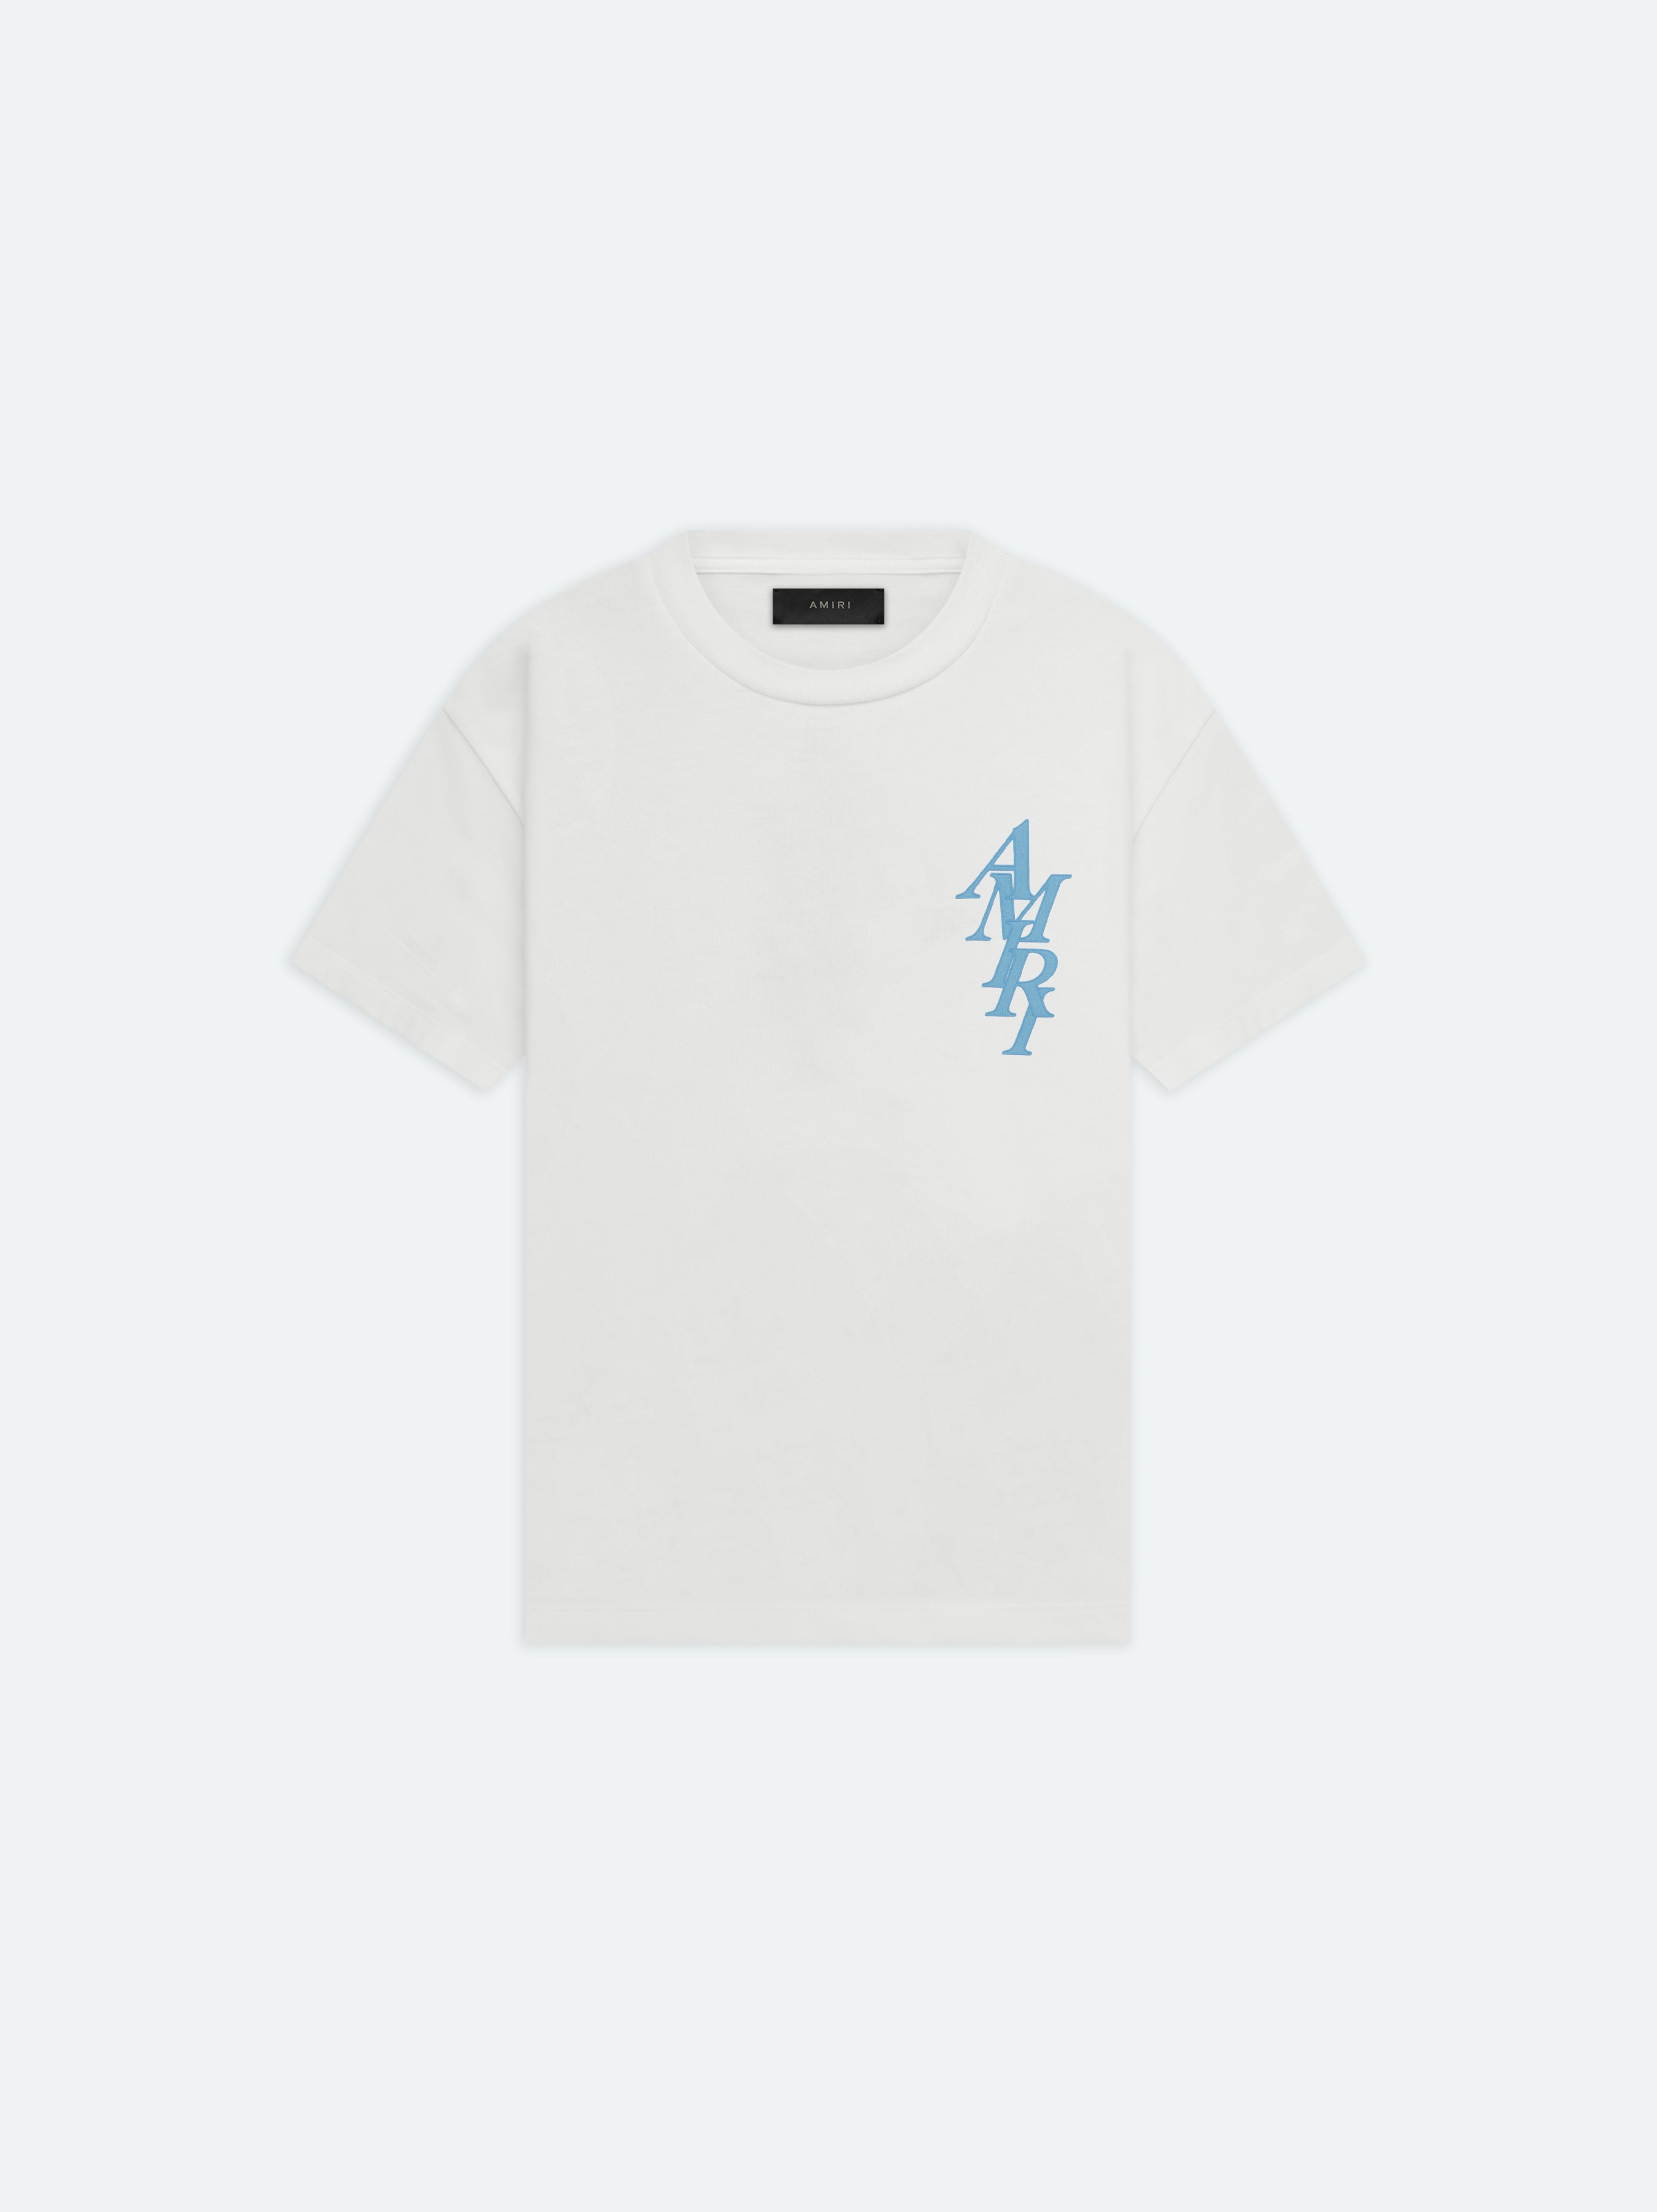 Product WOMEN - AMIRI STACK SLIM FIT TEE - White featured image